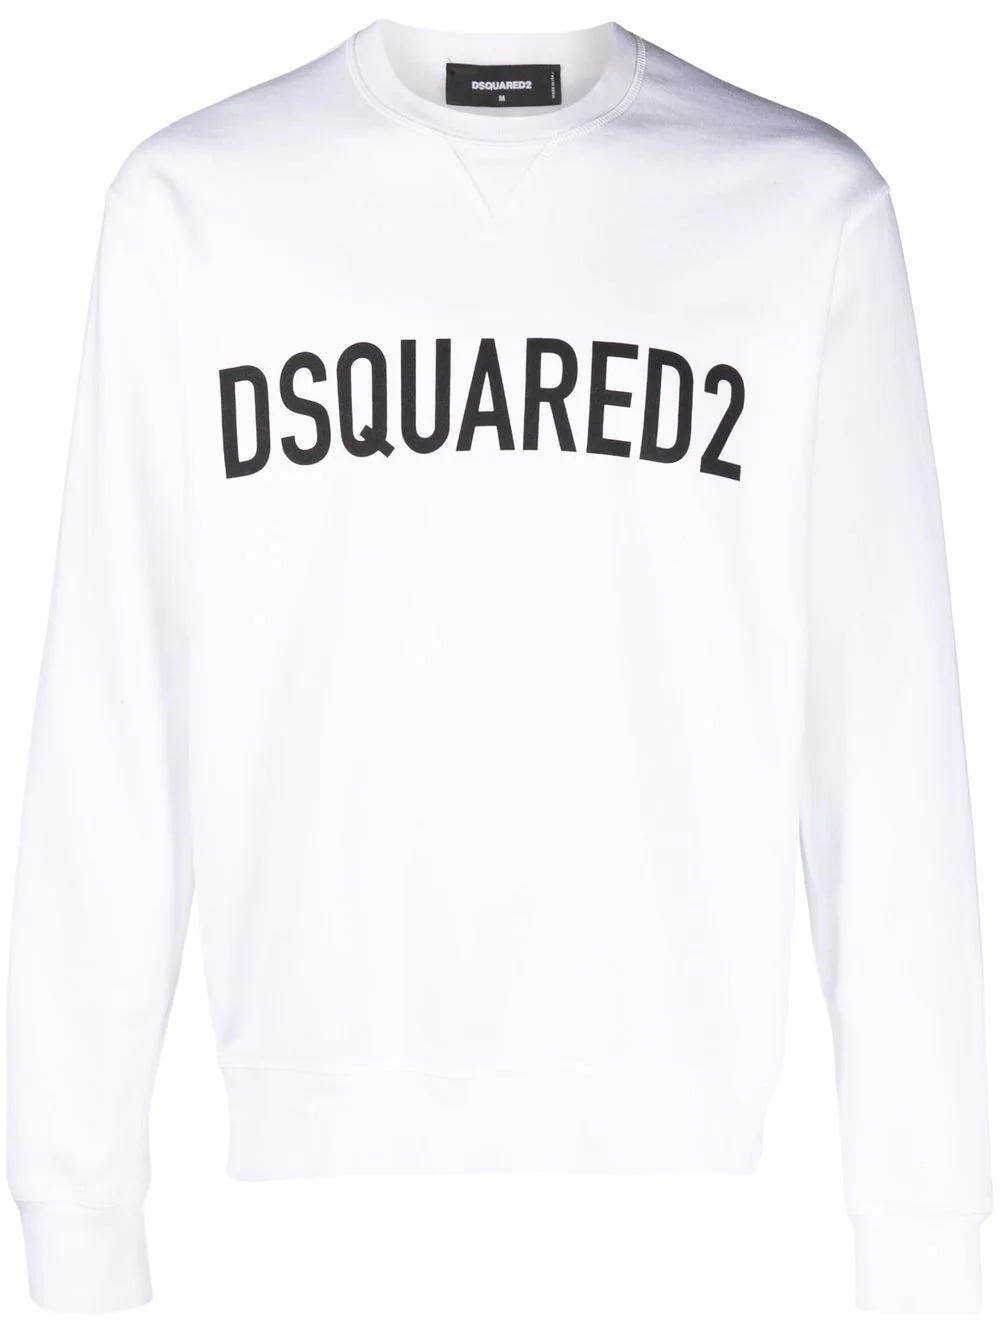 DSQUARED2 WHITE SWEATSHIRT WITH LETTERING LOGO